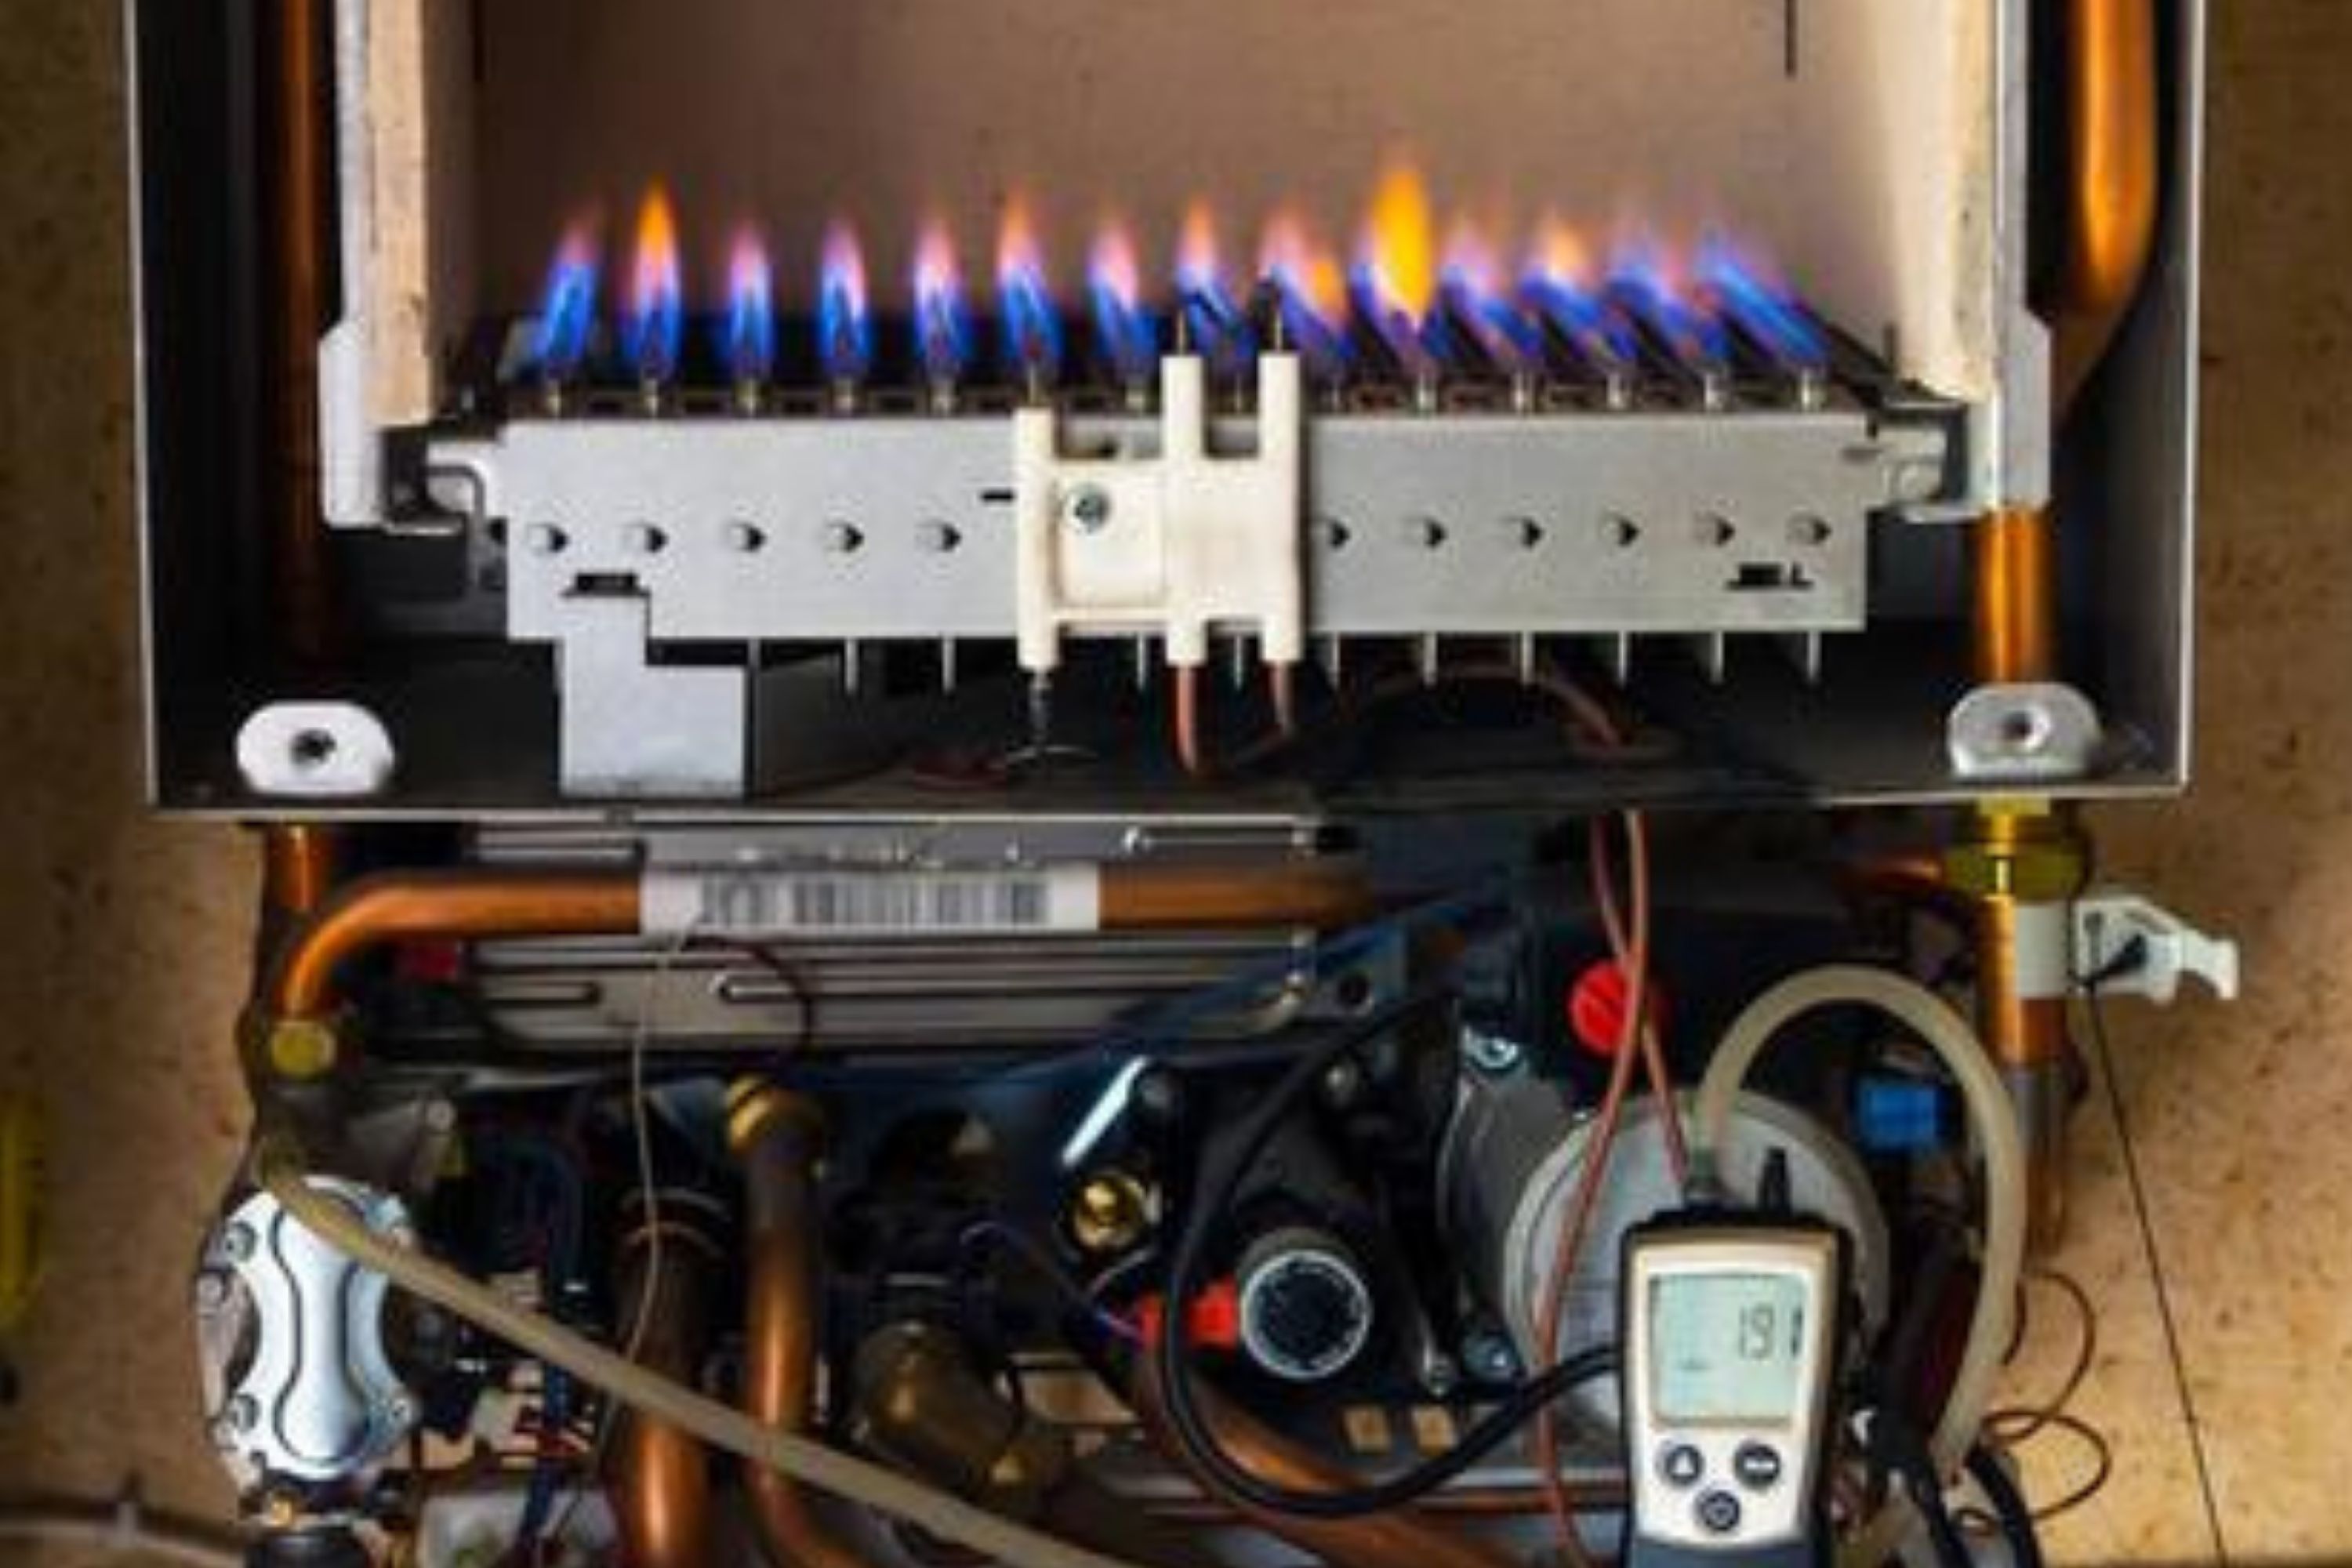 How to Bypass a Flame Sensor On Your Furnace